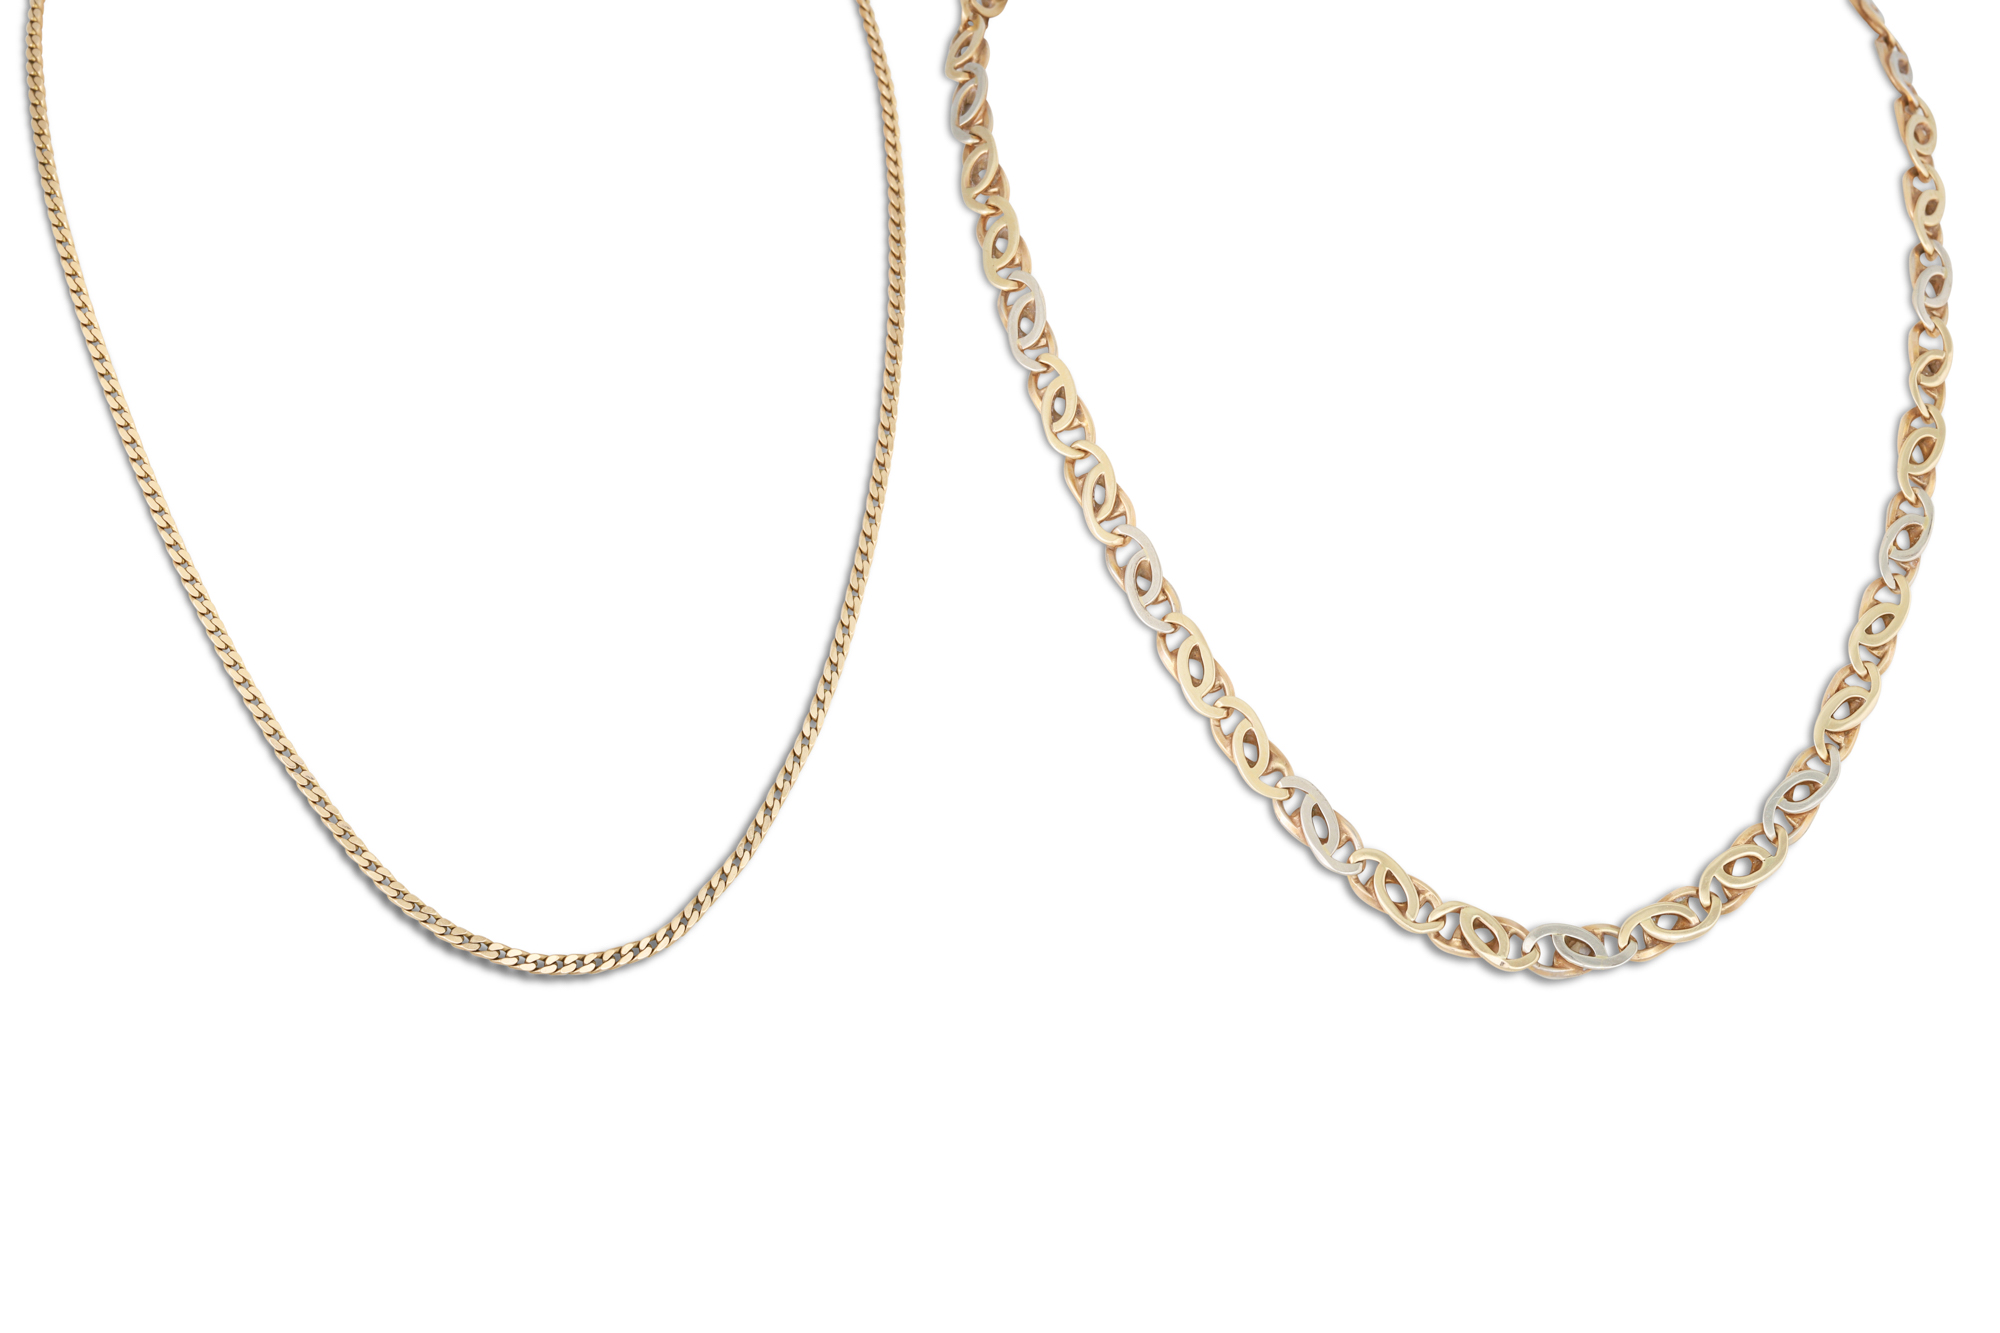 TWO 9CT GOLD NECK CHAINS, 30.2 g.